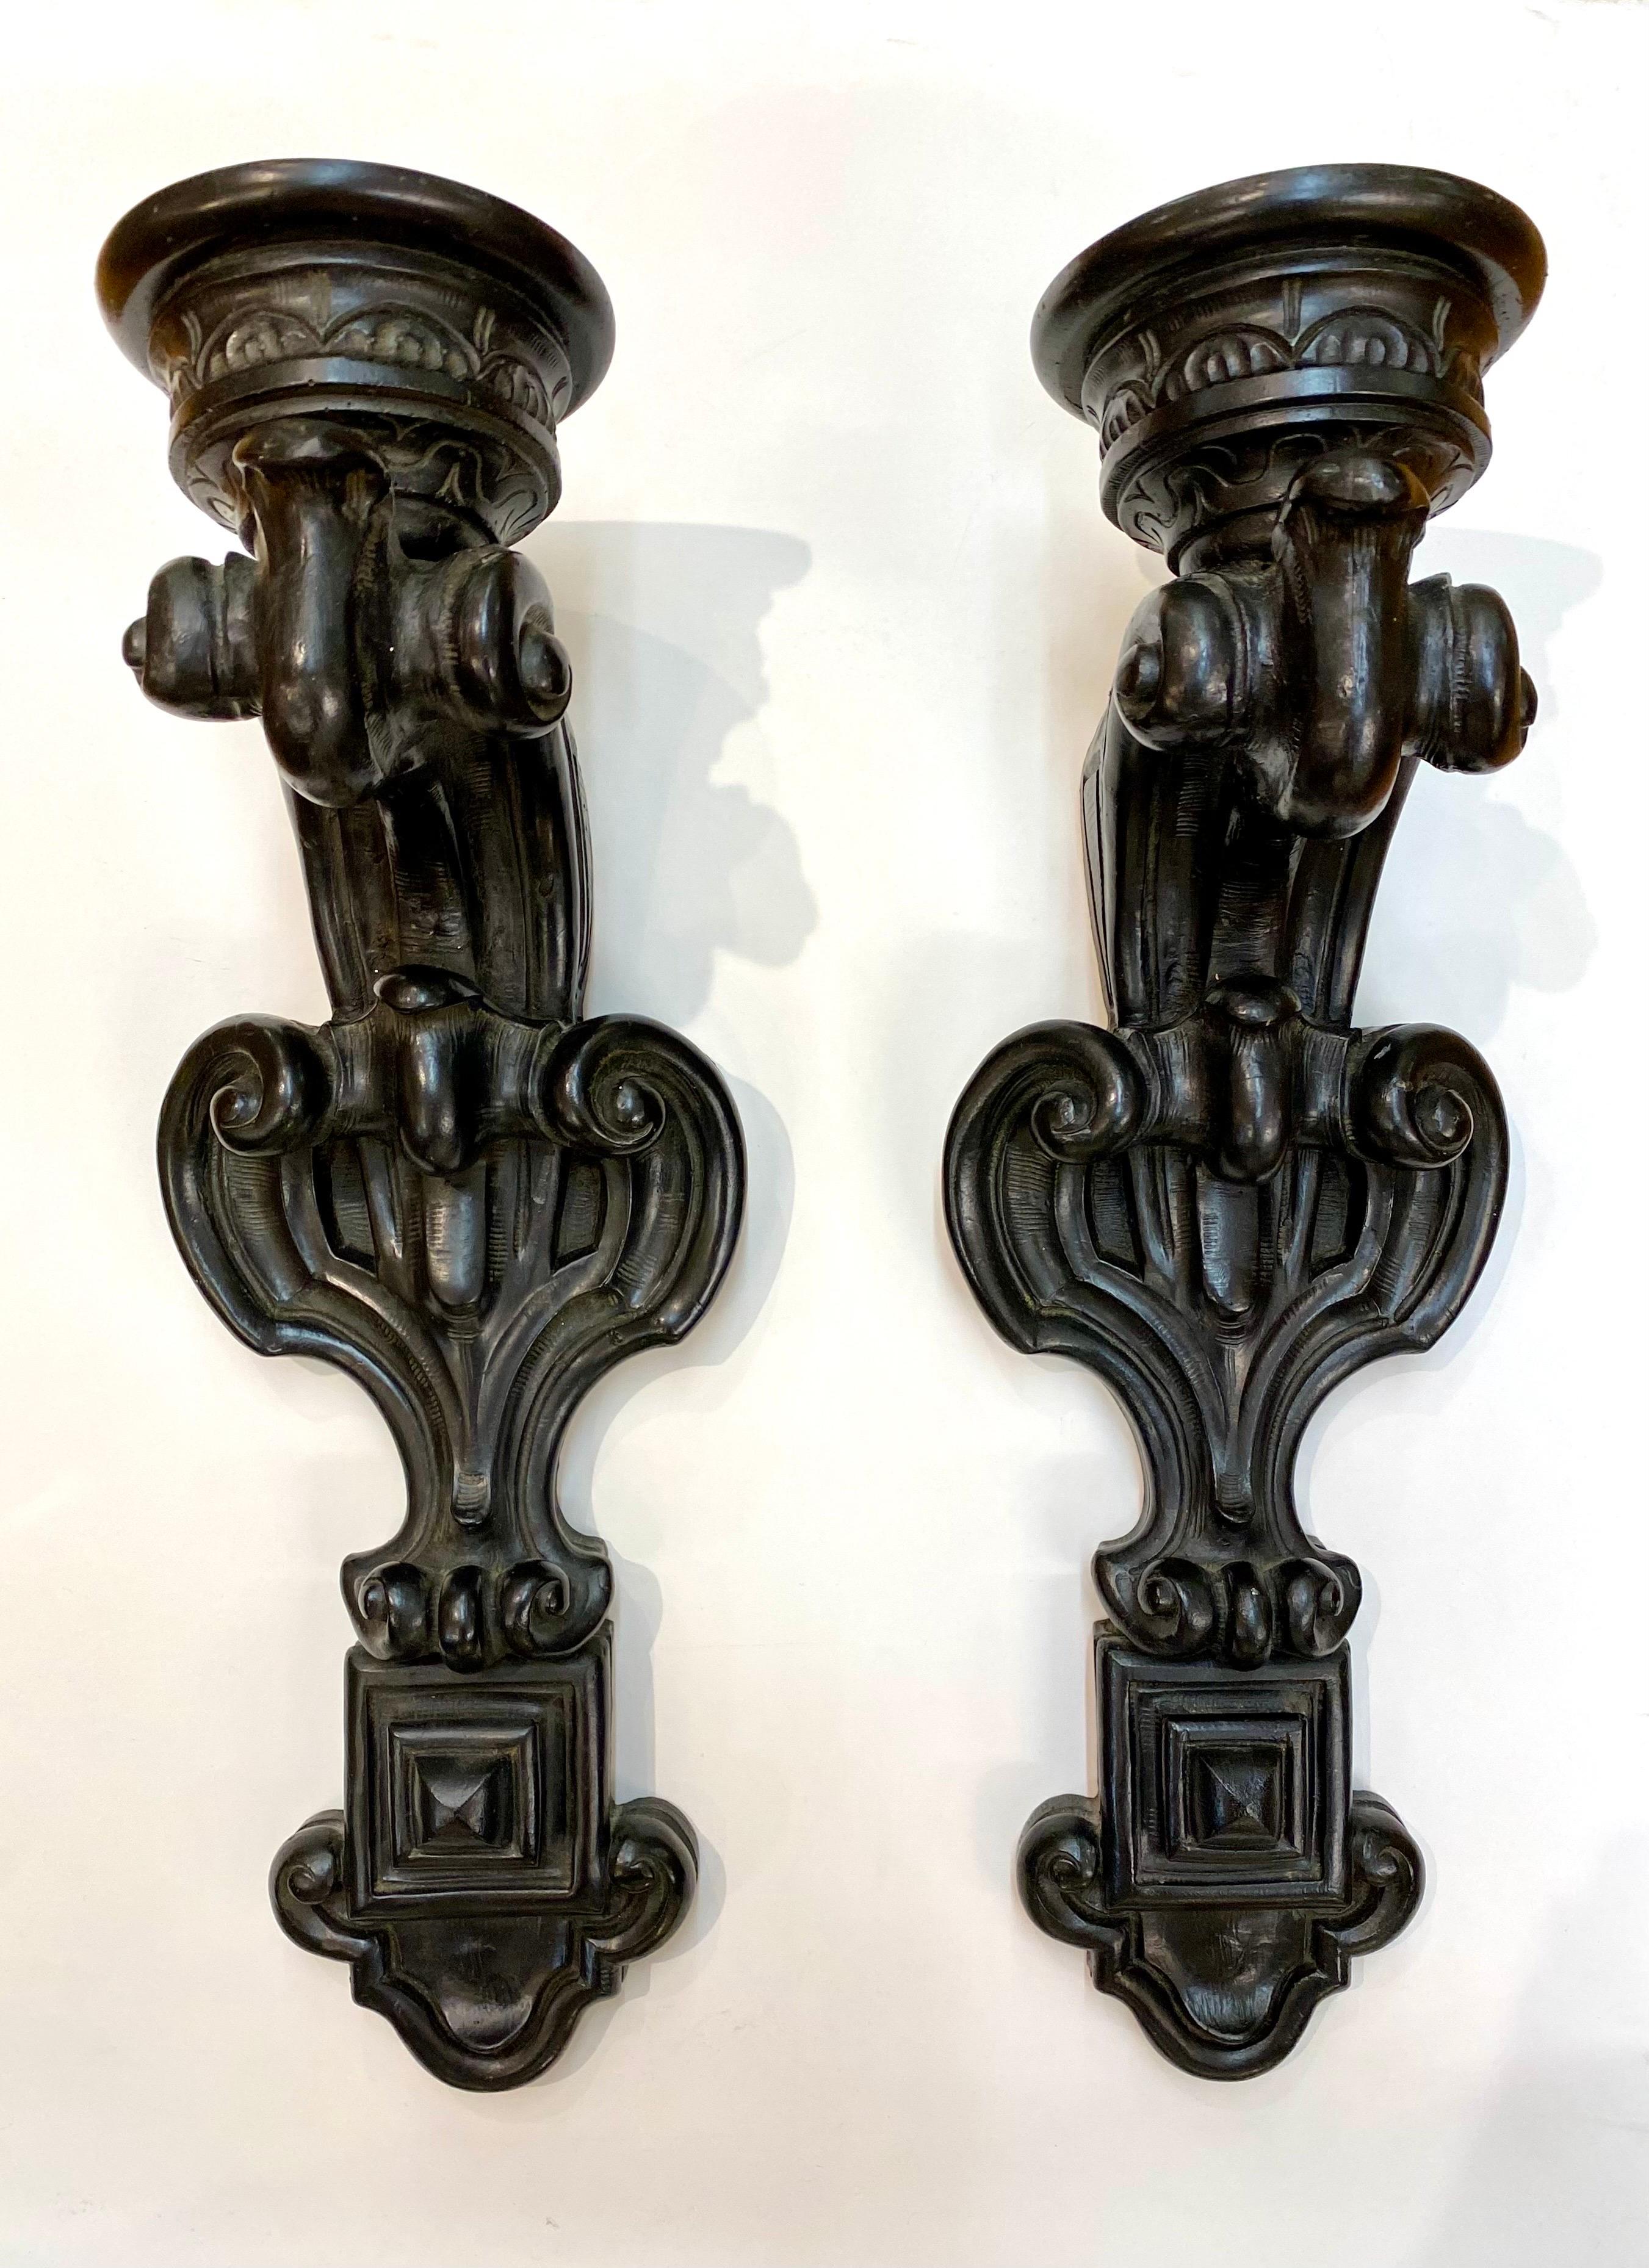 A wonderful and large pair of cast resin with antique black finish candle holder sconces in the Baroque style. Each has a 1” recesses hole 3” in diameter to fit a large column candle.

Left sconce 7 6/8” W x 21.75”H x 8”D
Right sconce 7.25”W x